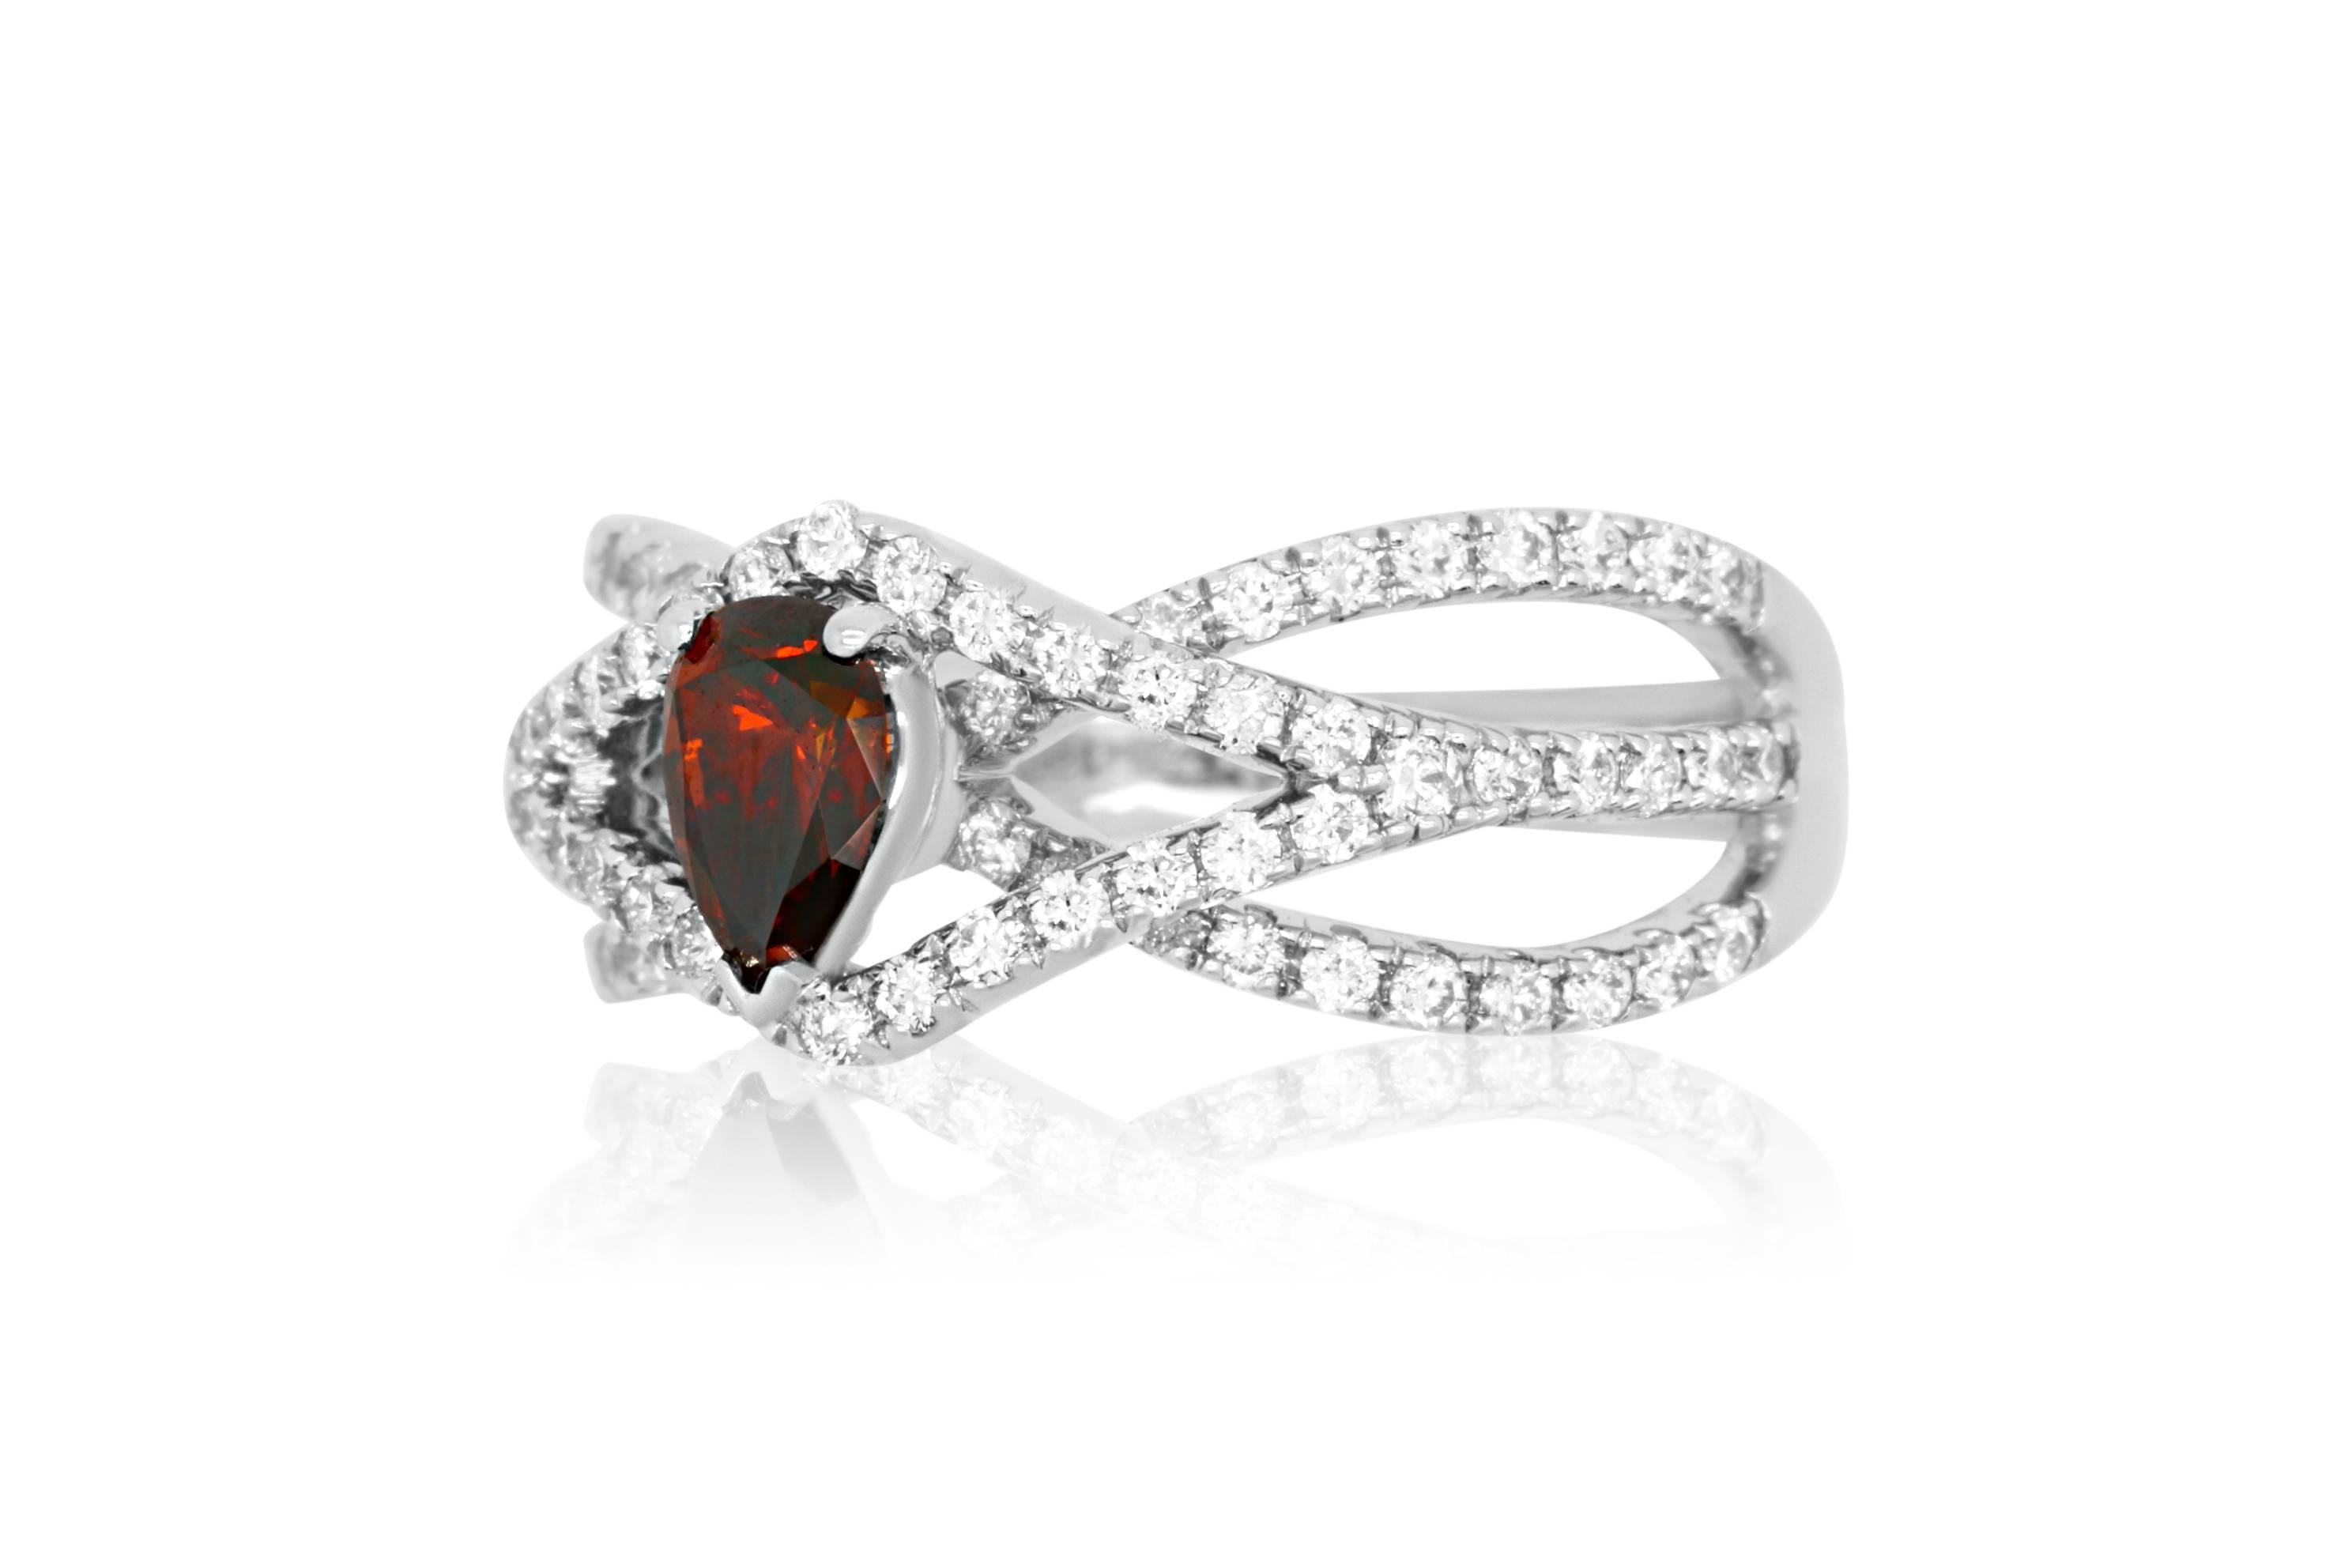 This beautiful piece features a dazzling pear shaped 0.51 carat Red Diamond set in White Gold and surrounded an exquisite criss crossing bands of 0.70 carat White Diamonds 

Material: 14k White Gold
Gemstones: 1 Pear shaped Red Diamond at 0.51